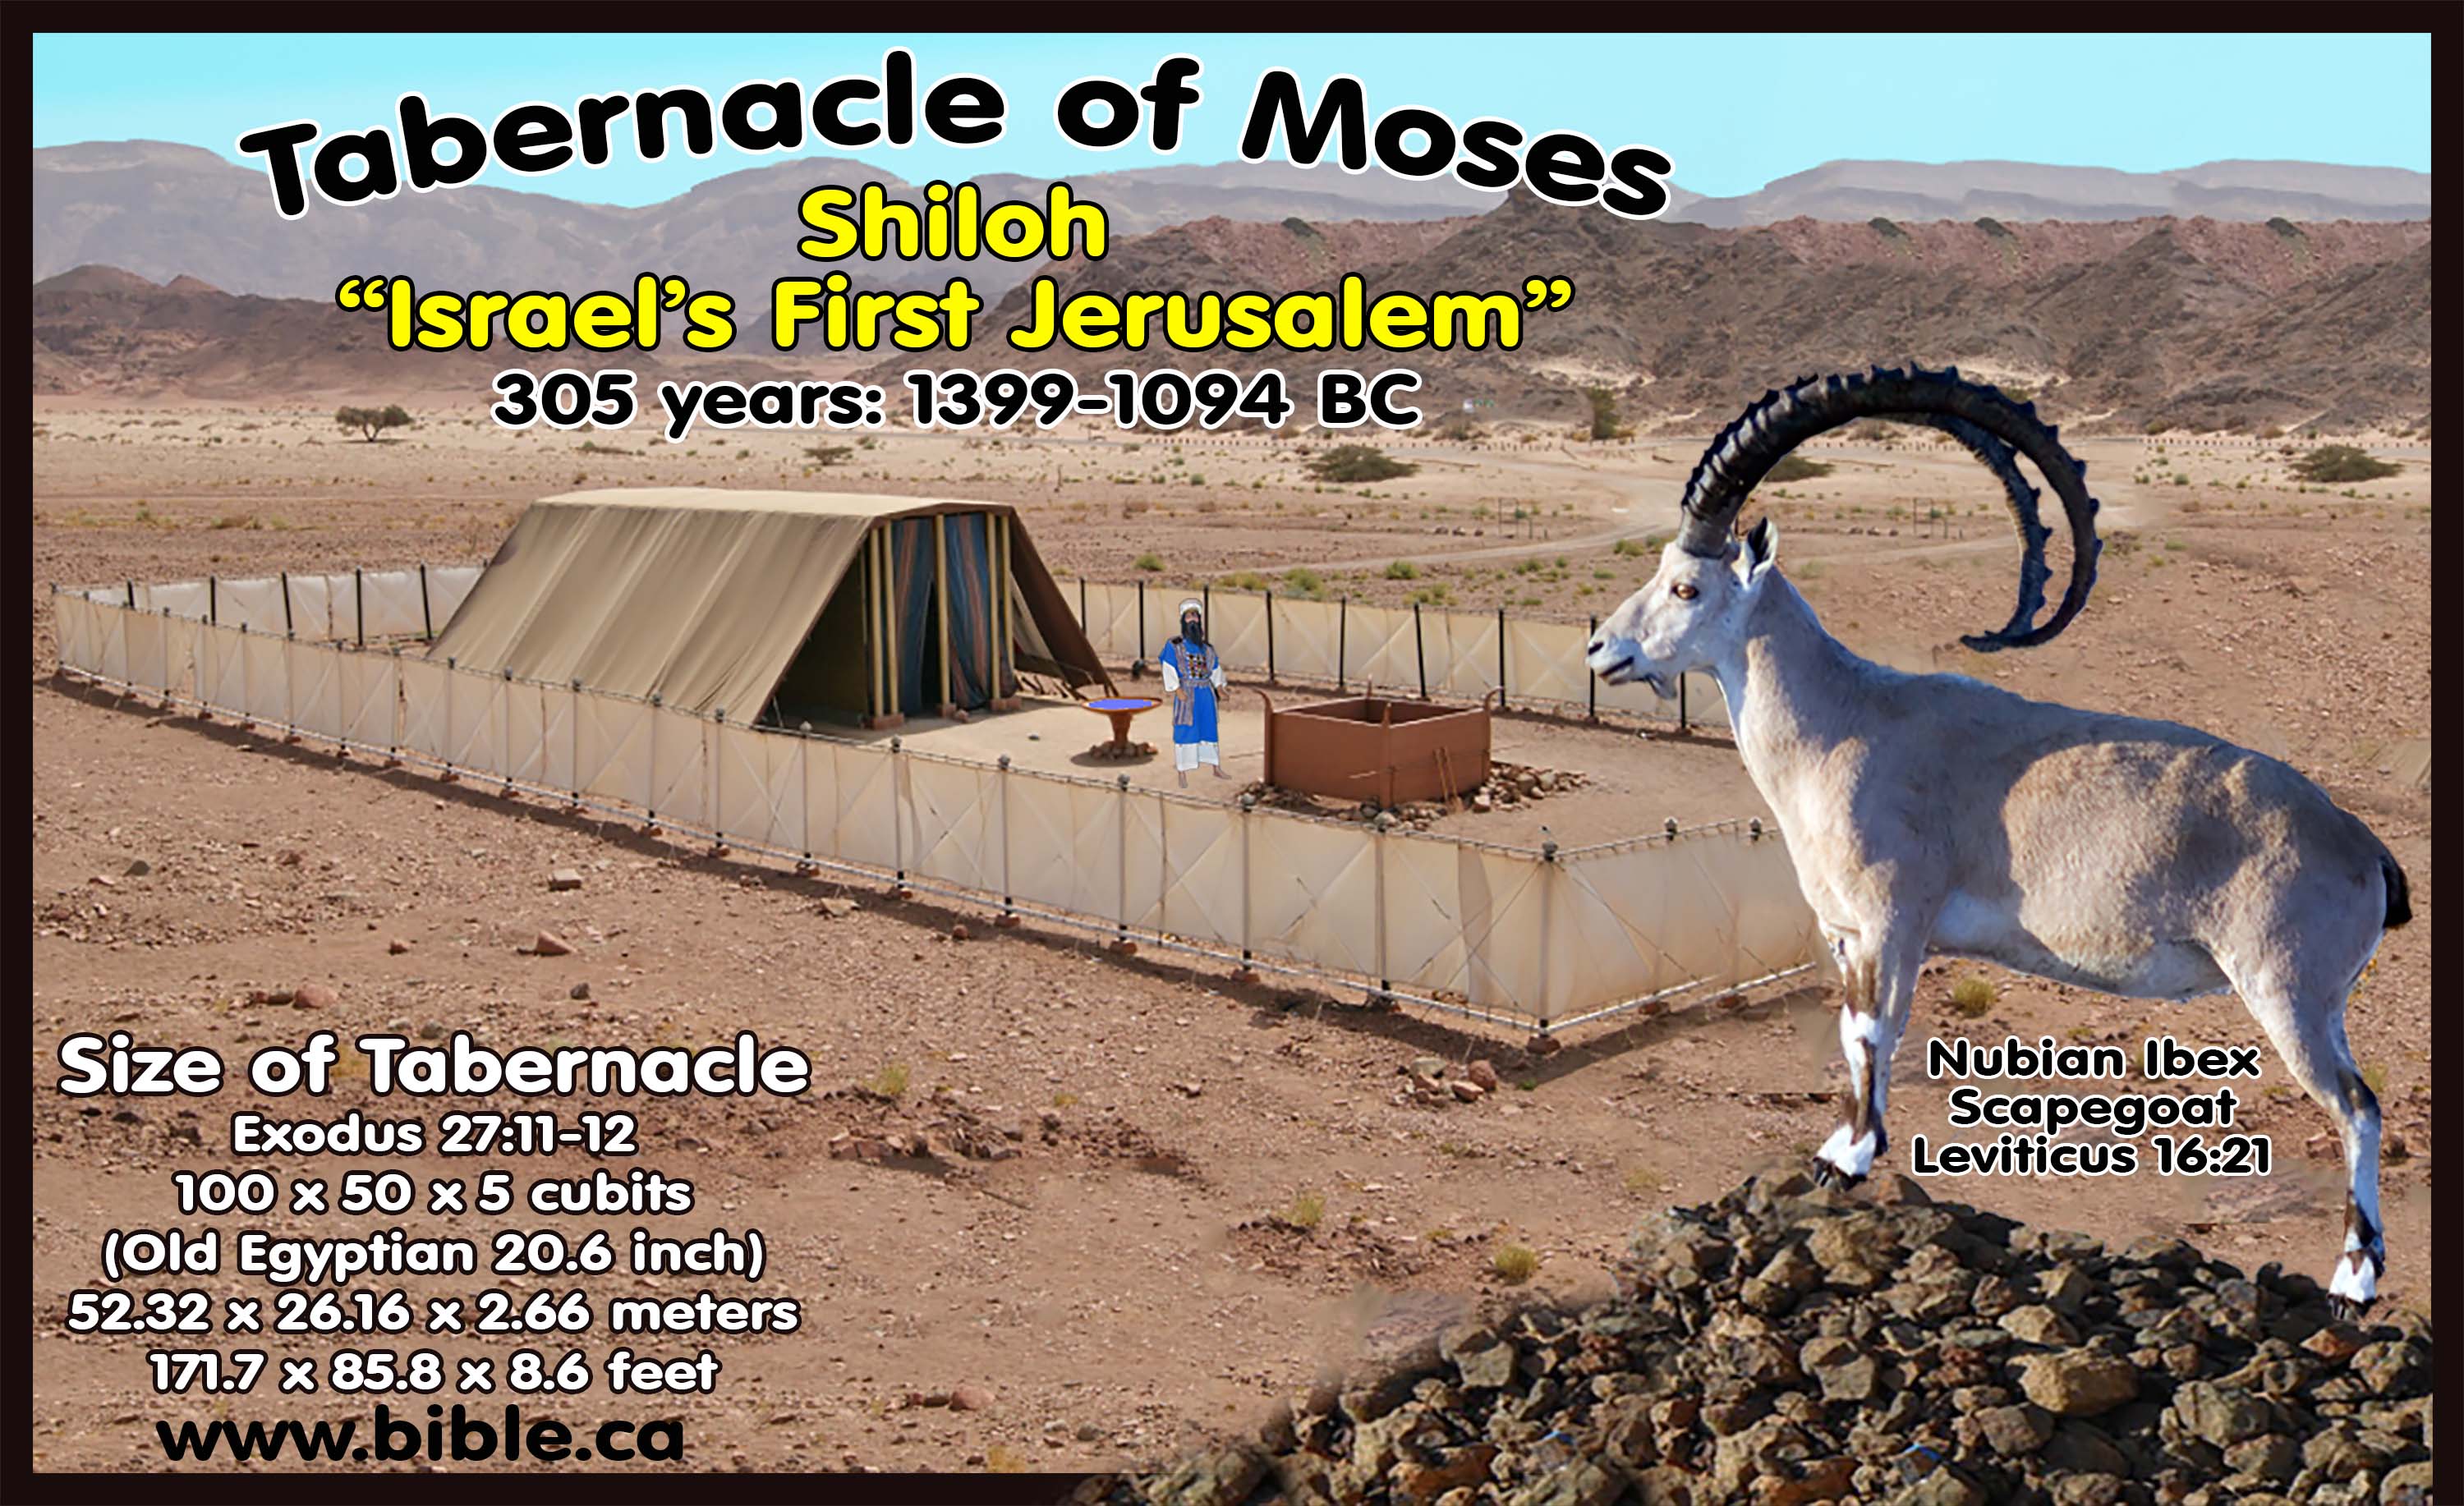 https://www.bible.ca/tabernacle-of-moses-tent-of-meeting-wilderness-outer-curtain-size-100-50-5-cubits-shiloh-israel.jpg